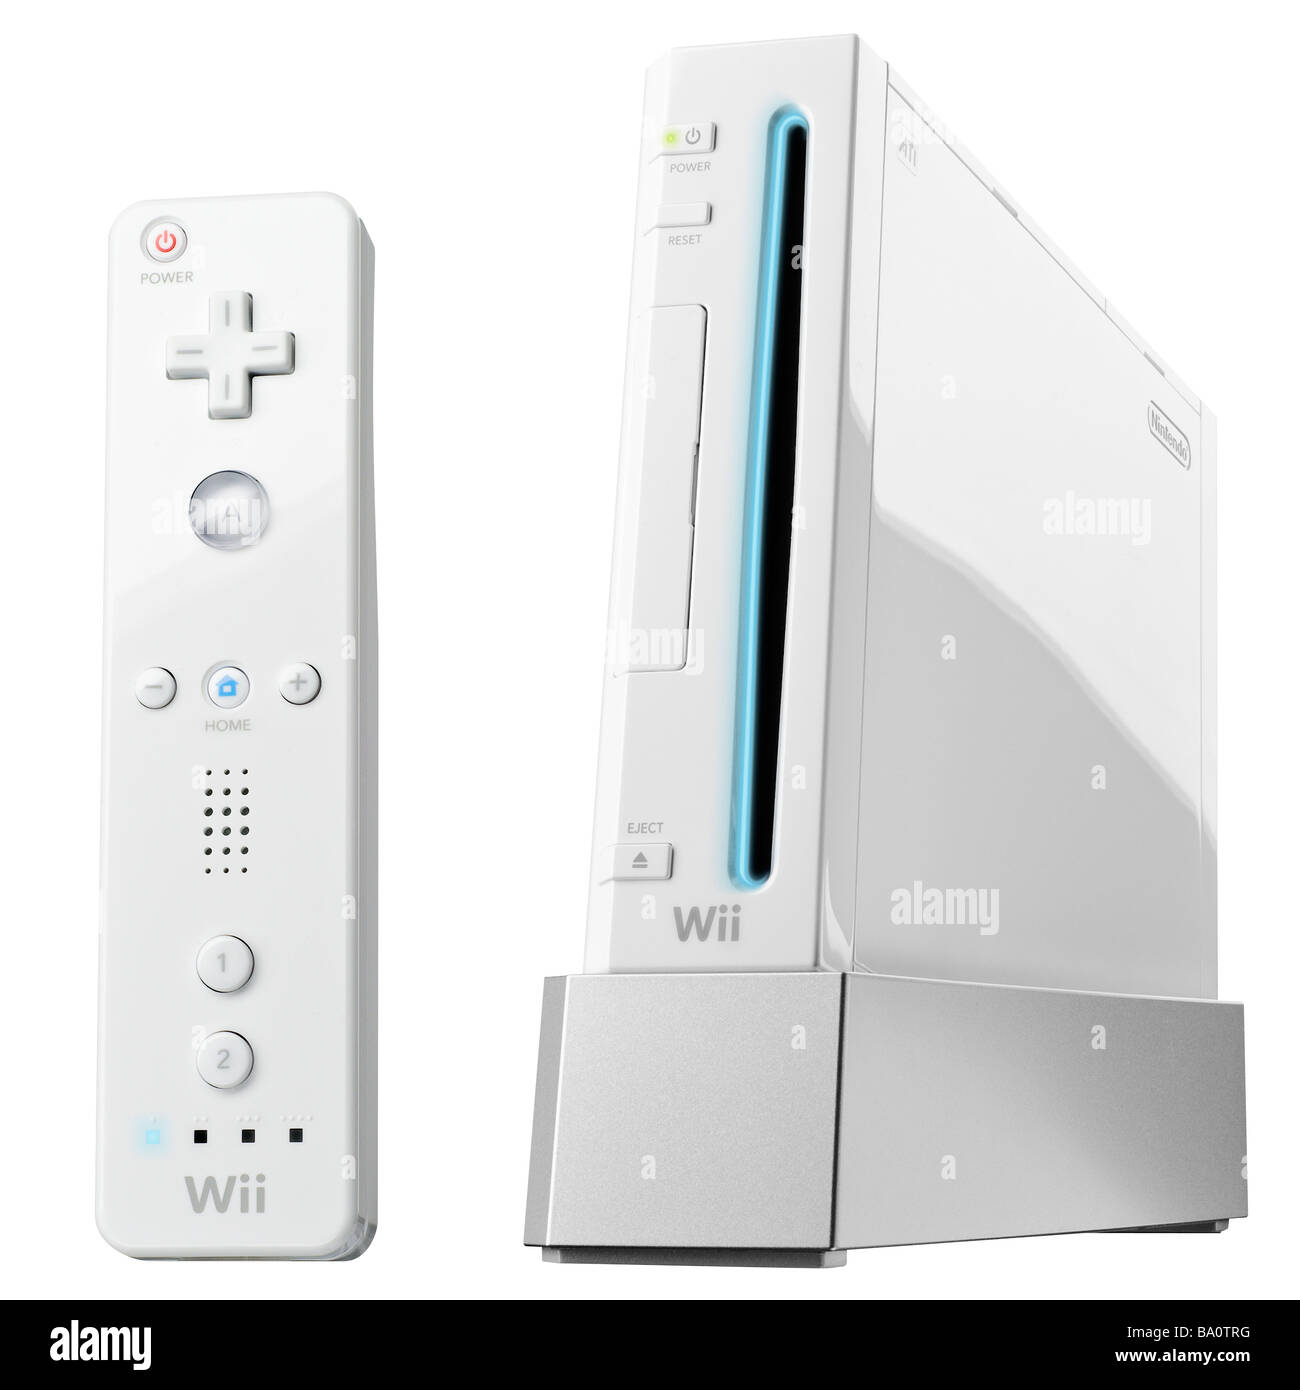 Nintendo Wii and Wii Remote control cutout on white background Stock Photo